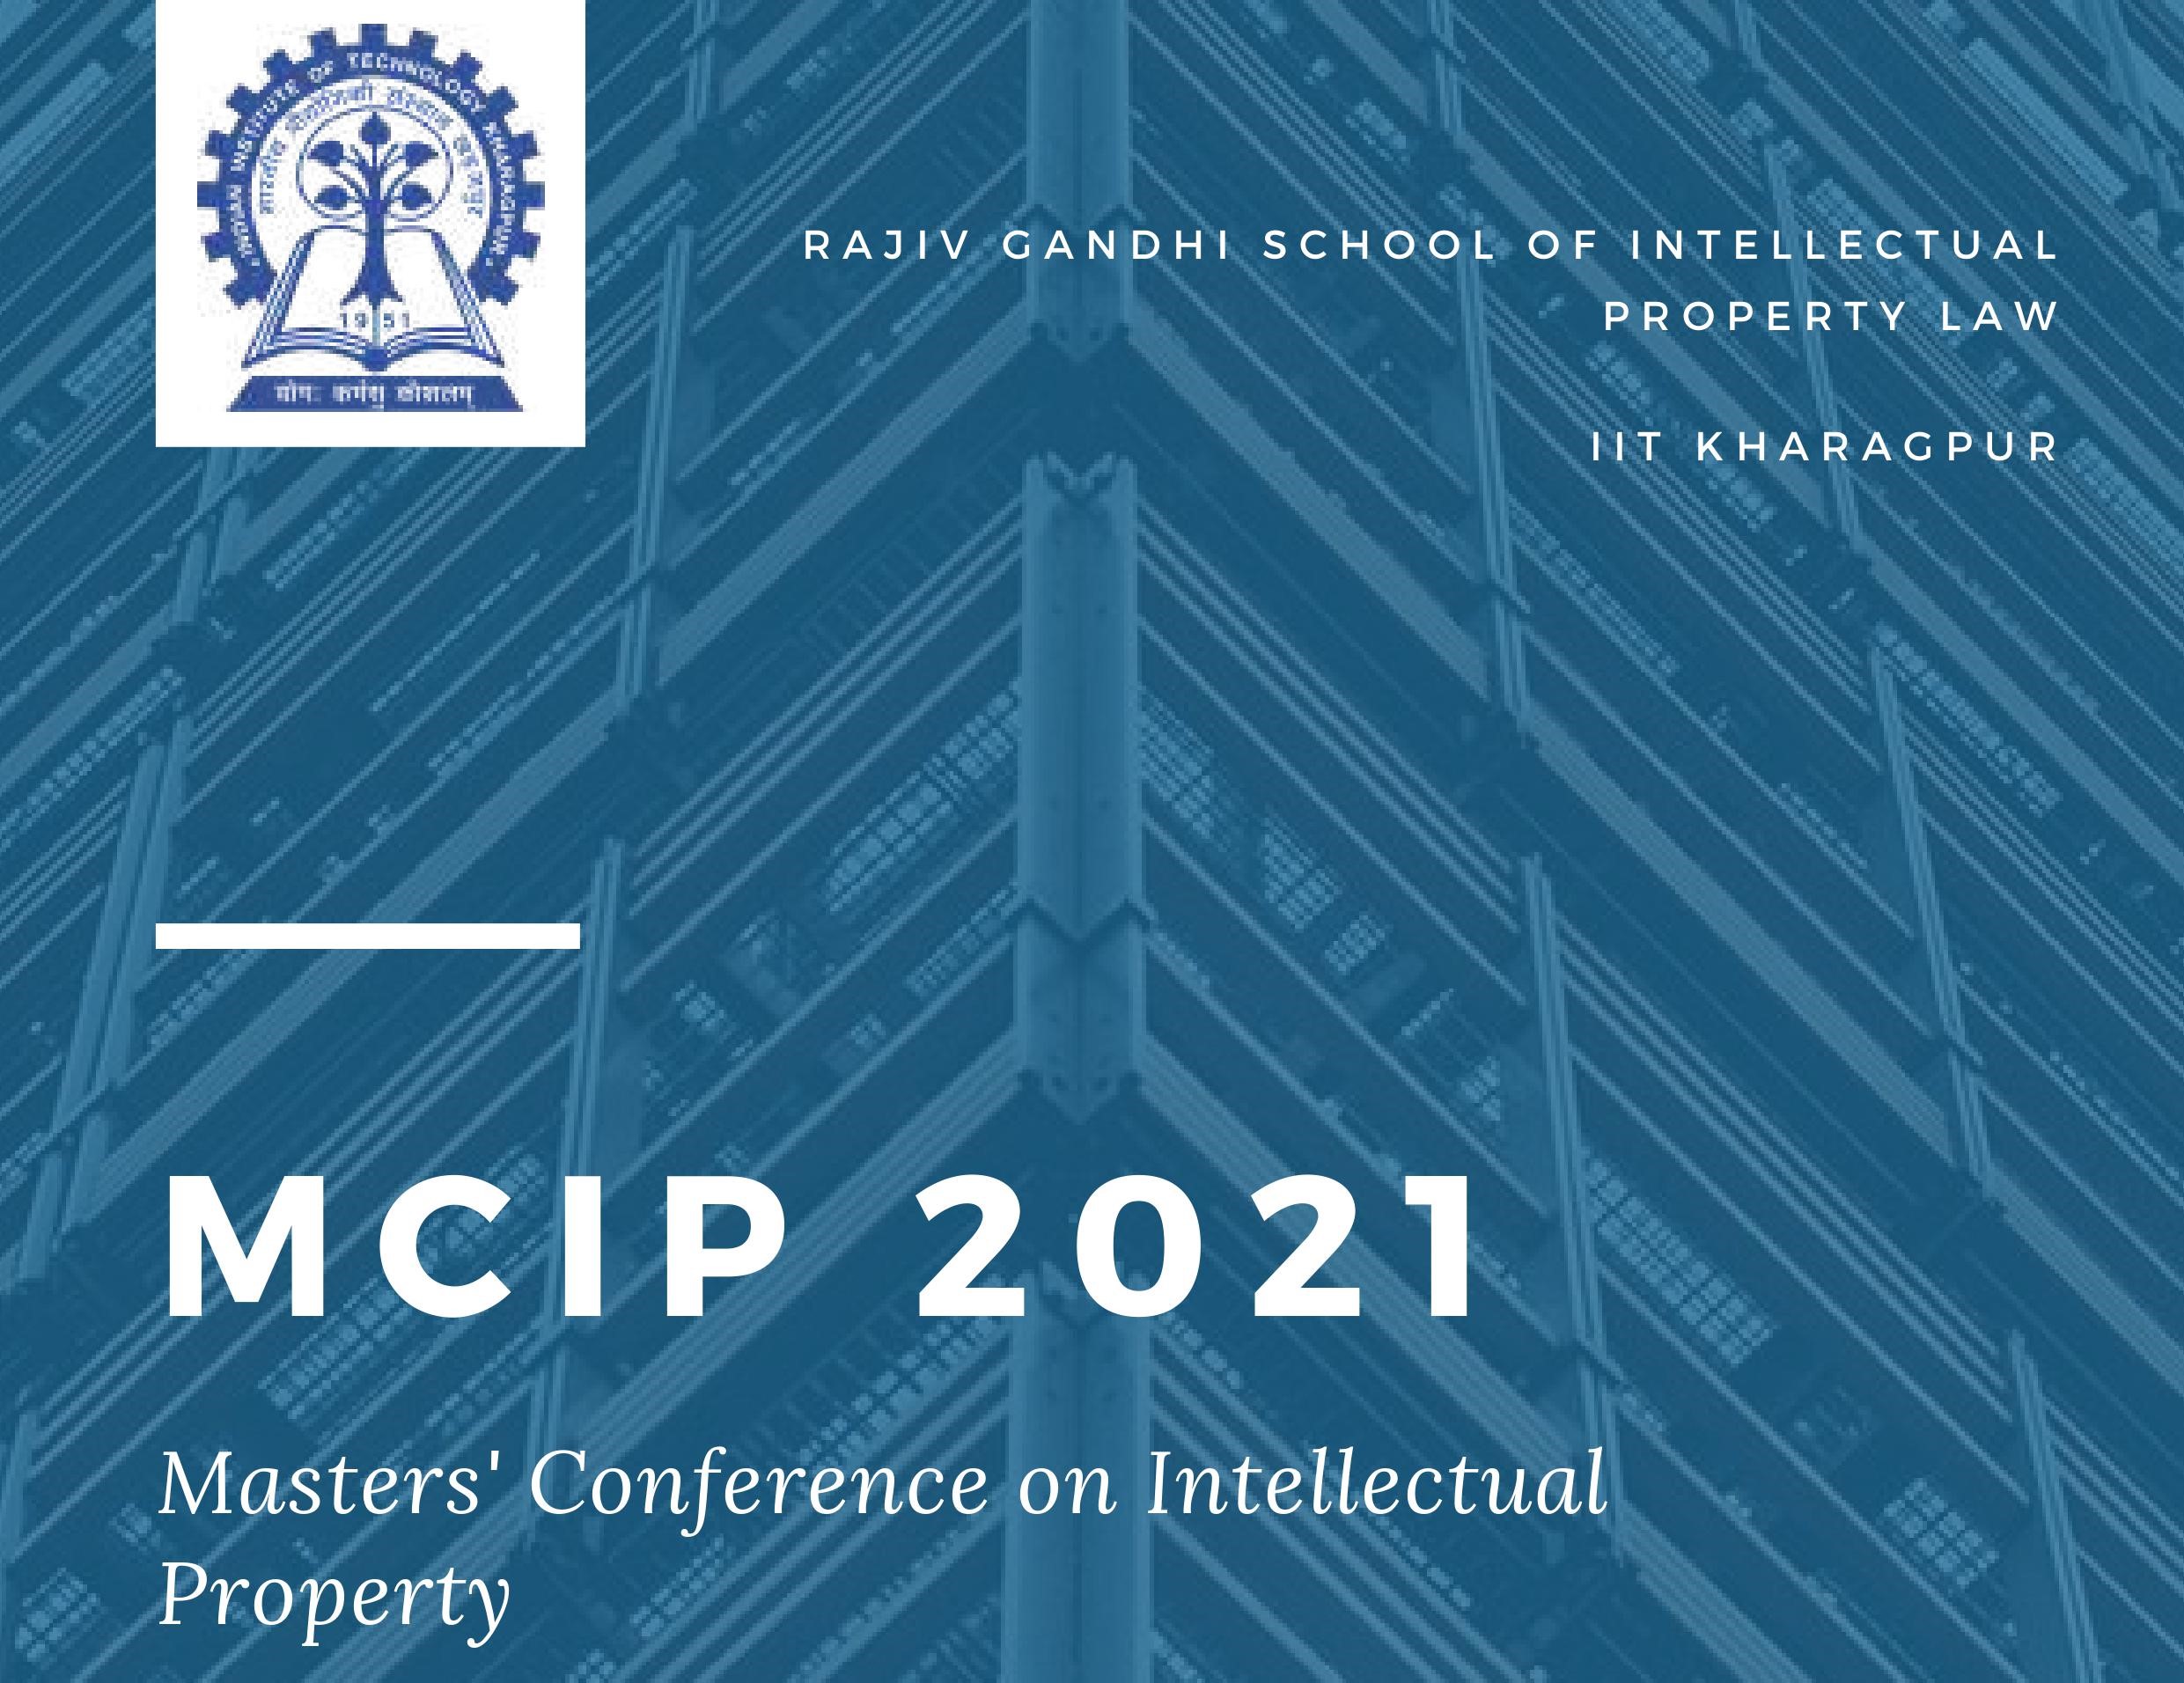 MCIP 2021 Masters' Conference on Intellectual Property | RGSOIPL, IIT Kharagpur